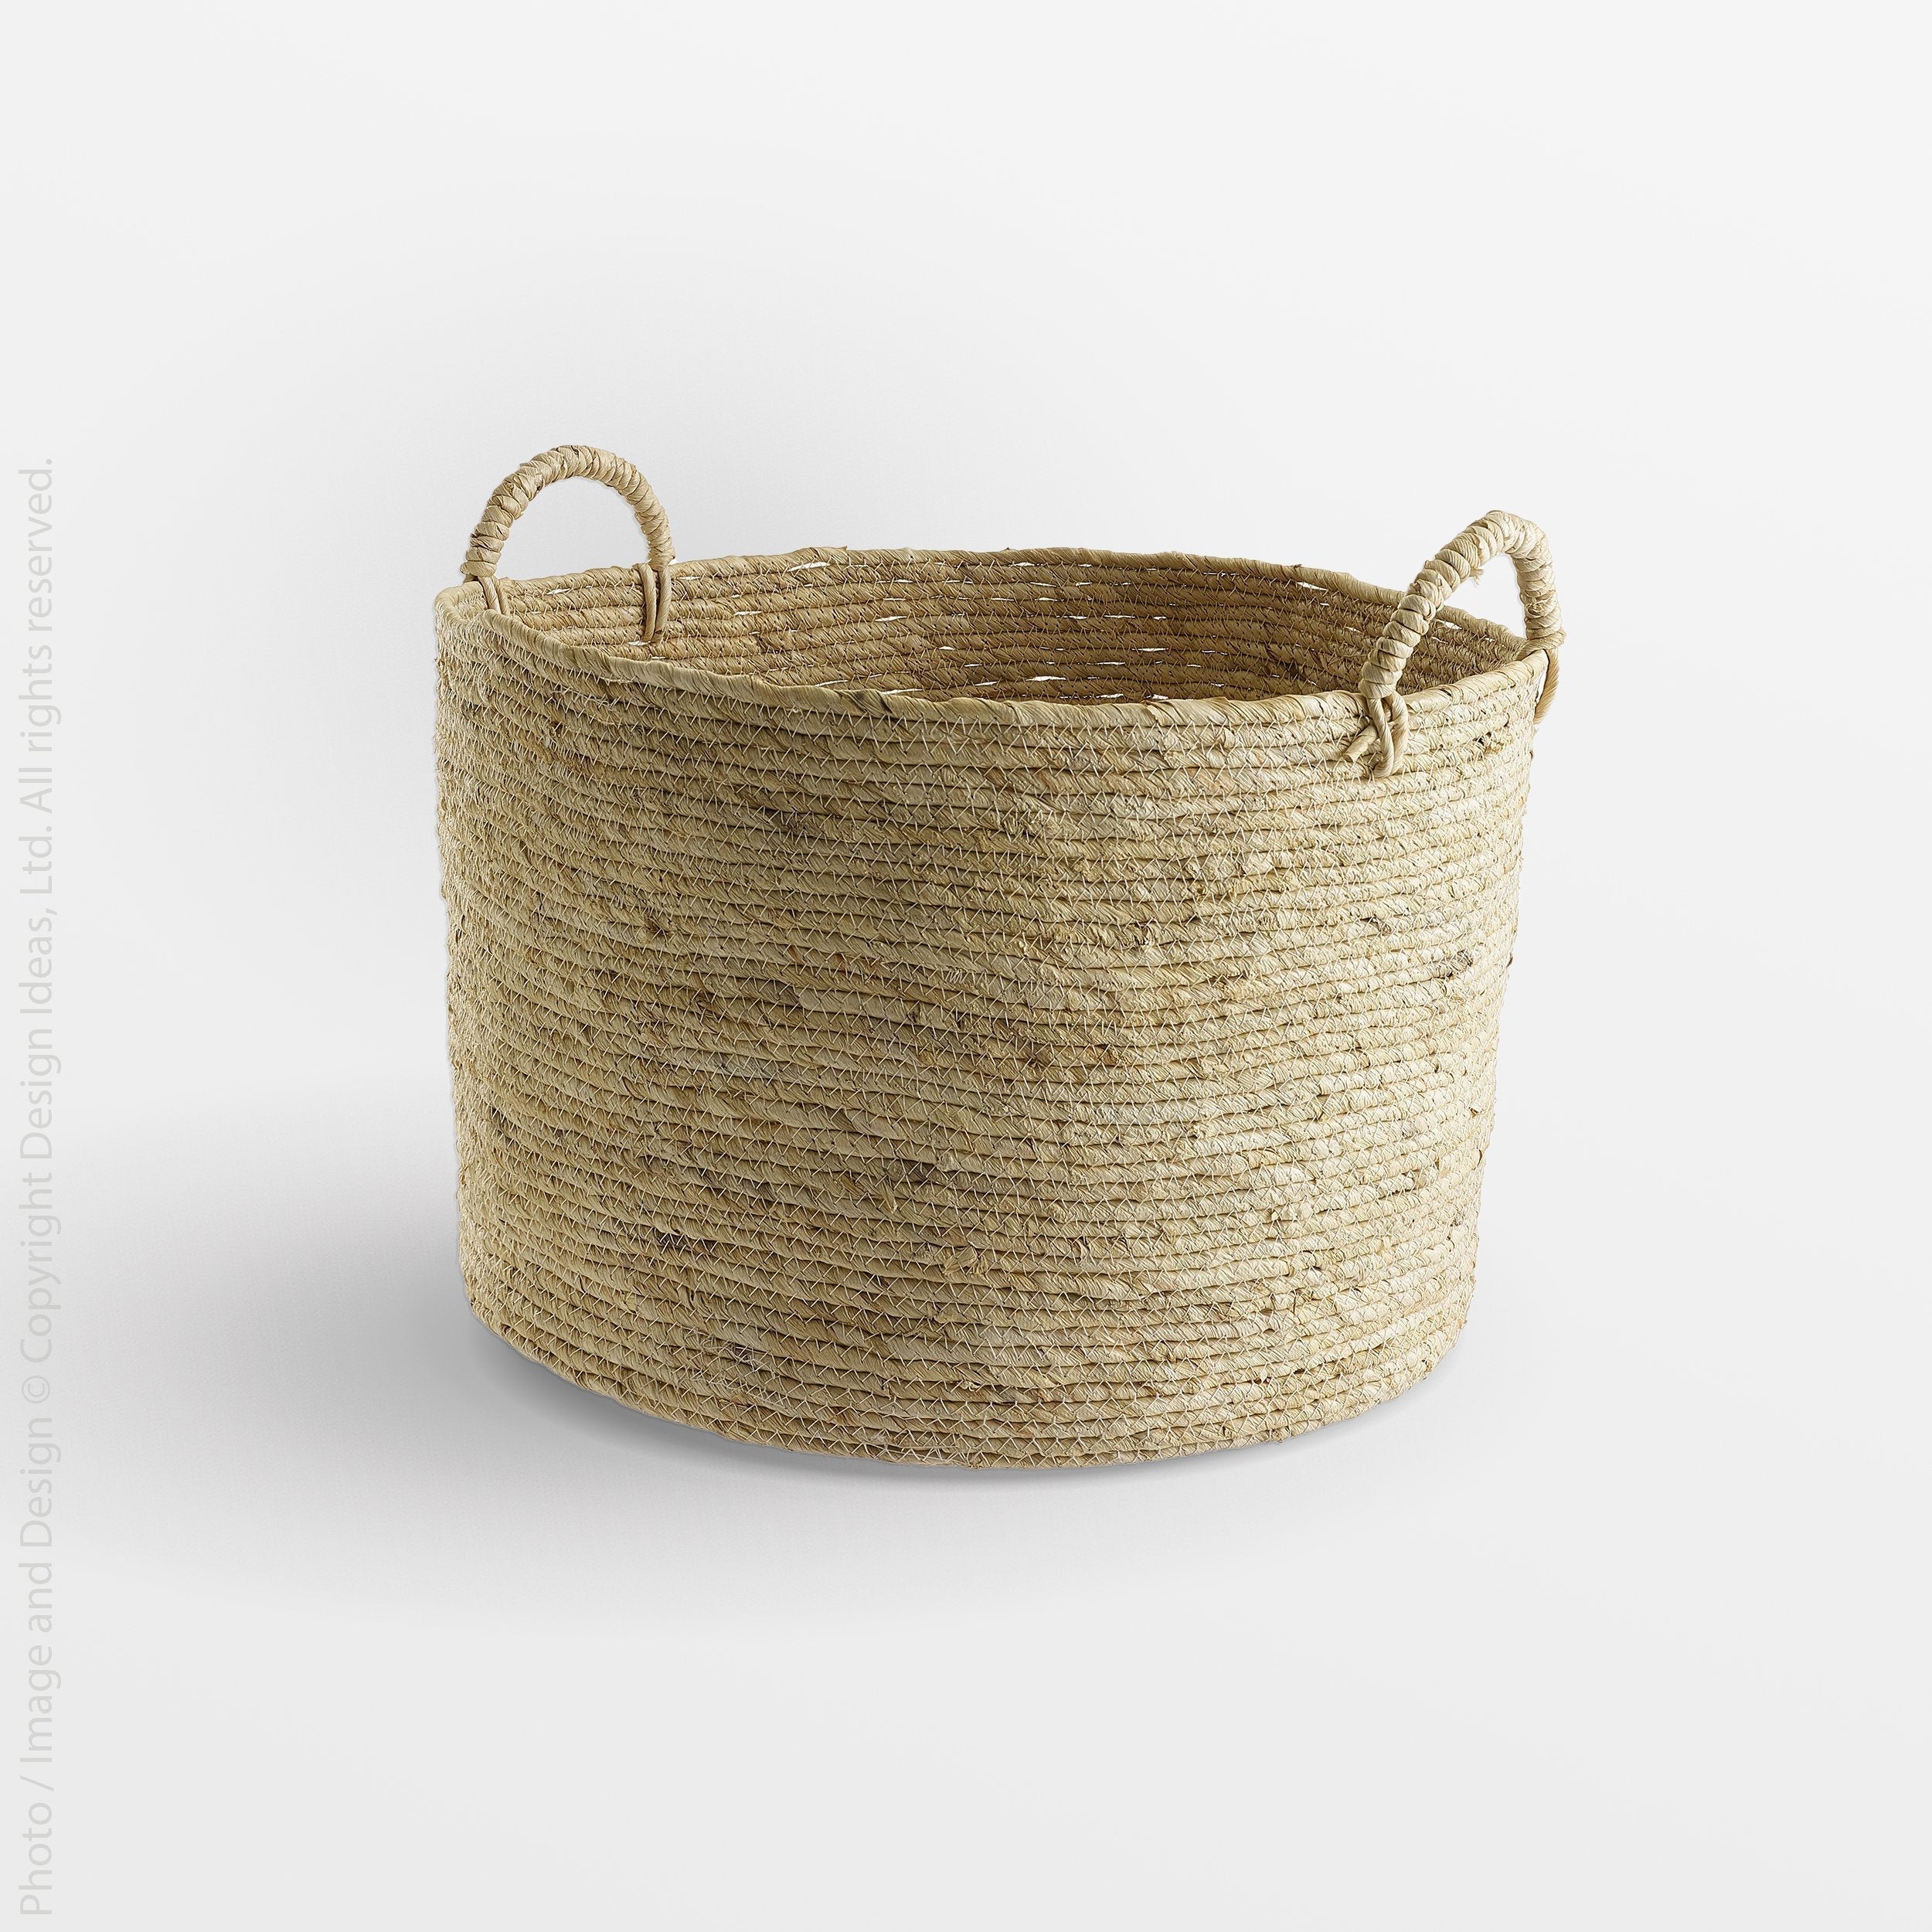 Maiz™ throw basket - Natural | Image 1 | Premium Basket from the Maiz collection | made with Corn husk for long lasting use | sustainably sourced with recycled materials | texxture